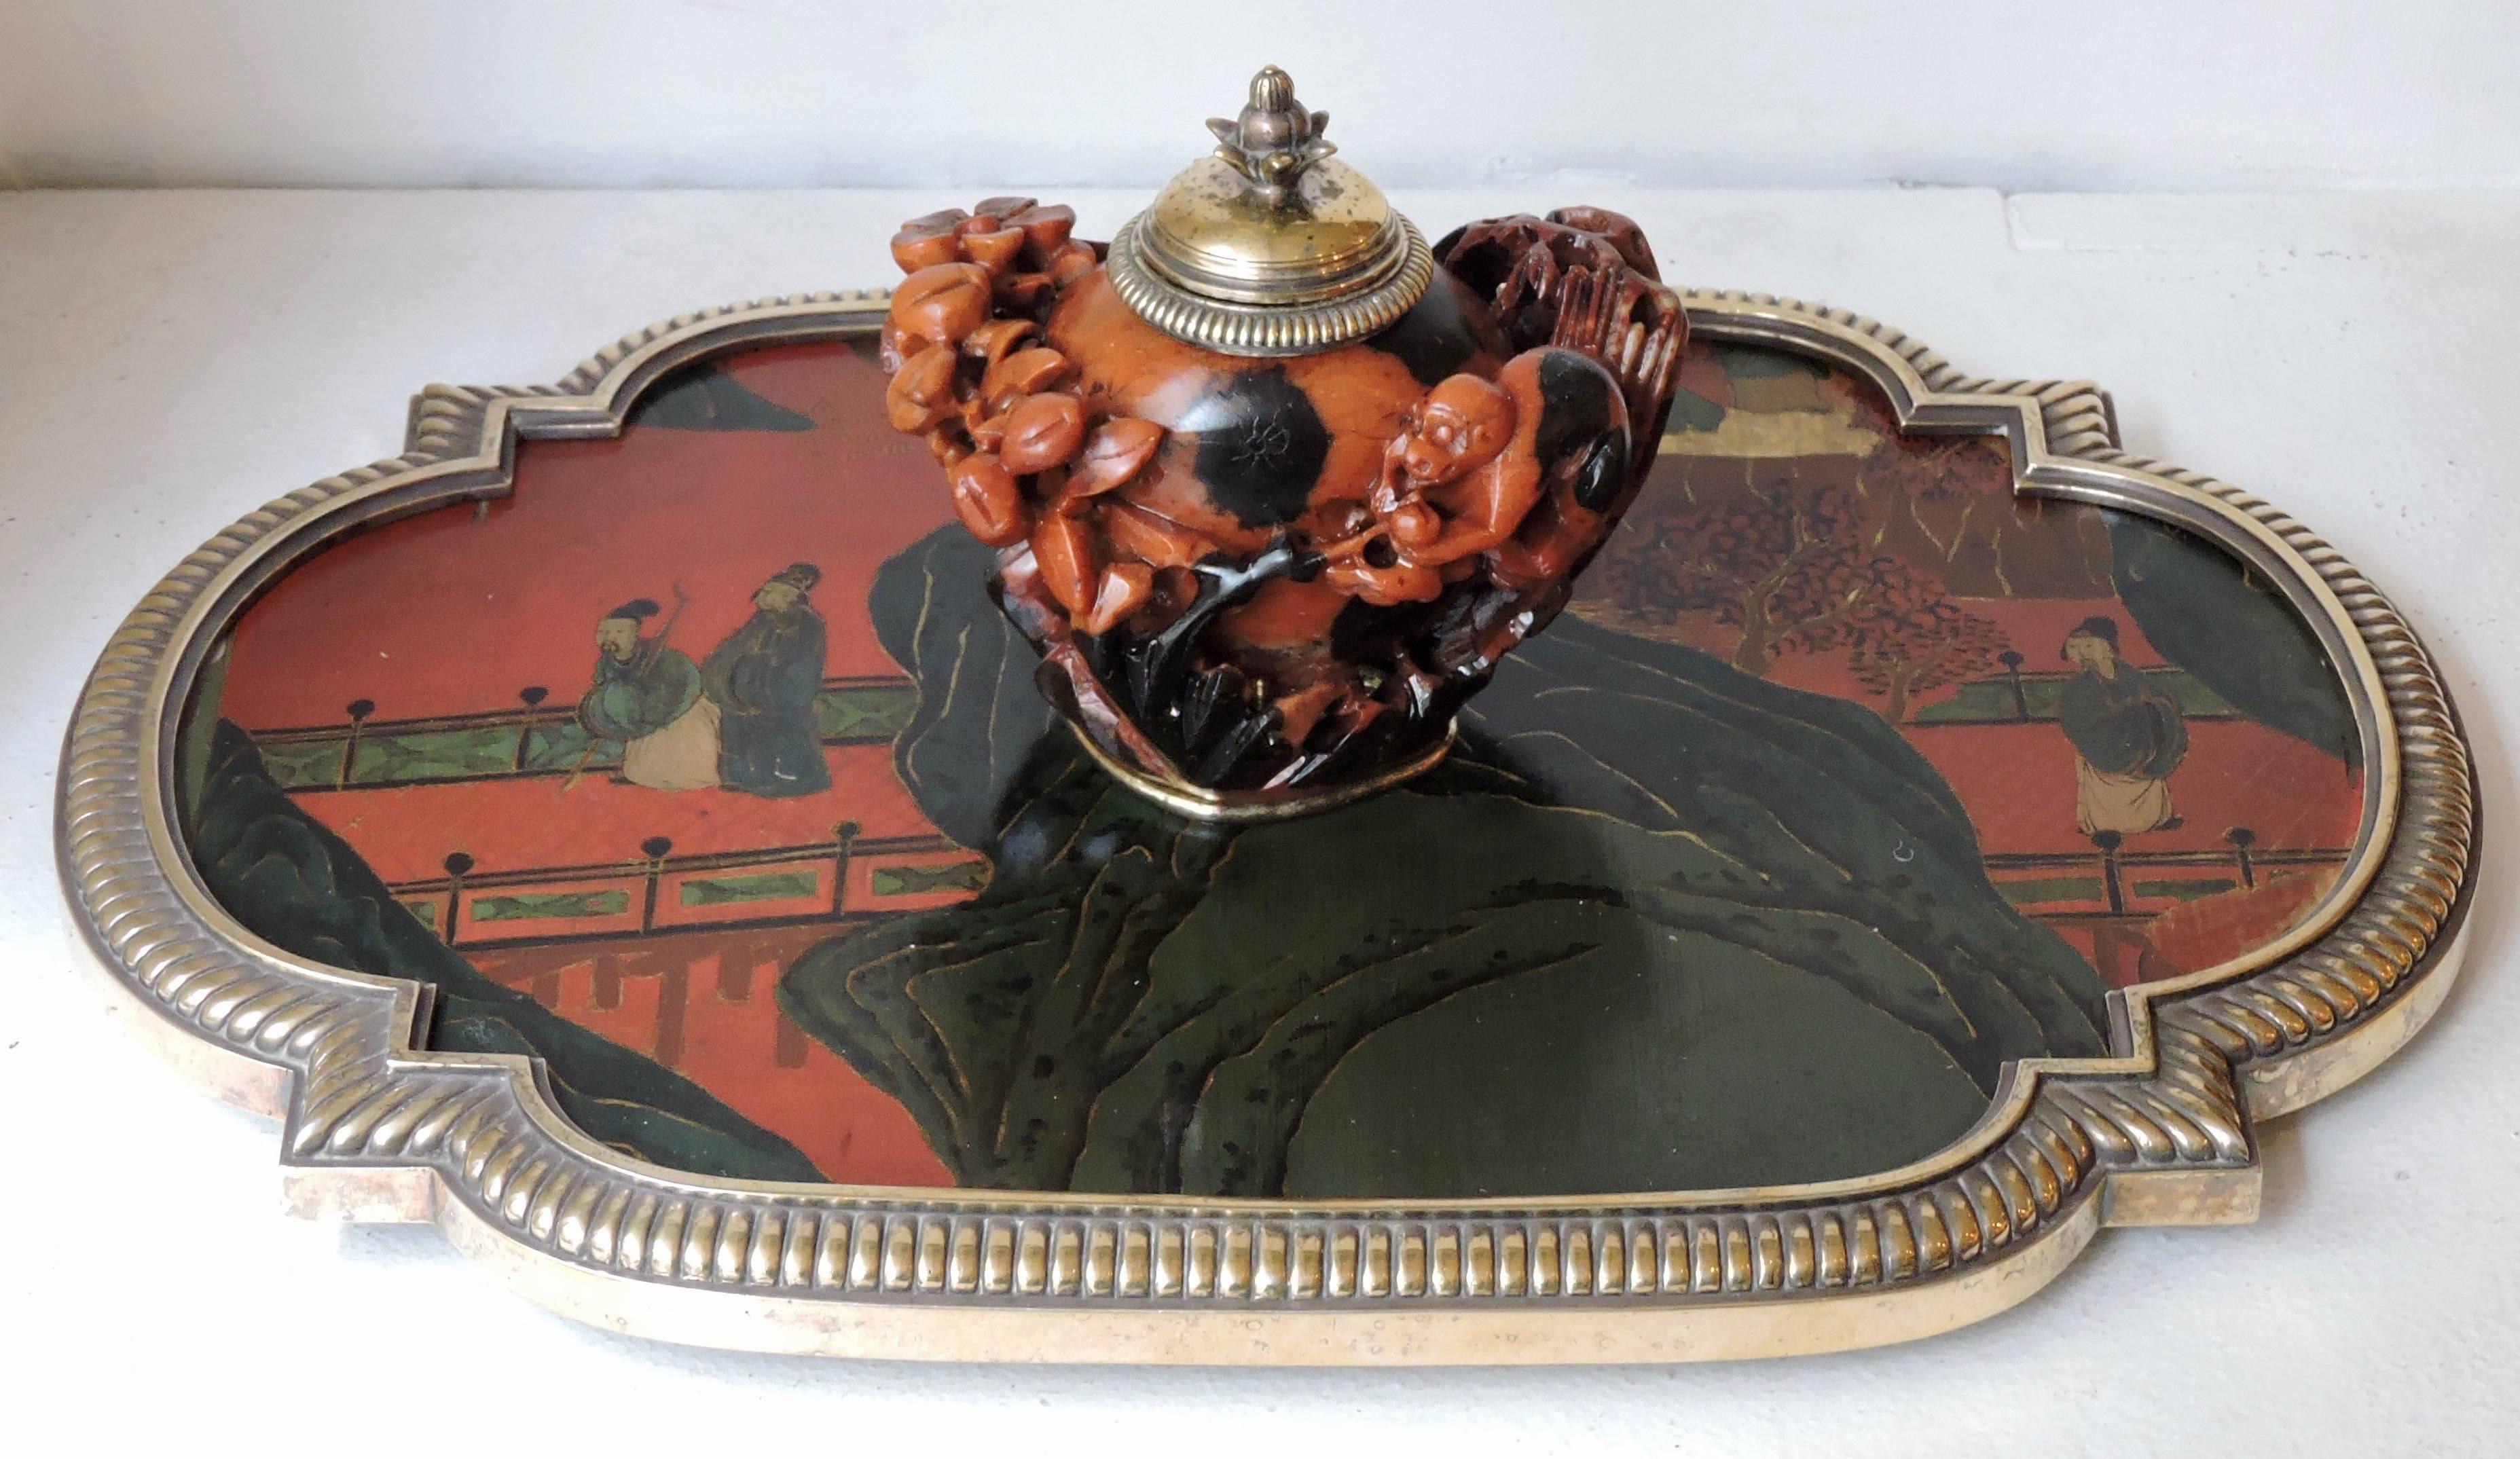 Open-Worked Carved Monkey Design Soapstone Inkwell (Steatite) 
Resting on a Red and Gold China Lacquer Tray designed with characters on a bridge. 
Mount of tray and inkwell bronze godrons 
Signed Boin-Taburet in Paris and Numbered 78878 53 
Circa